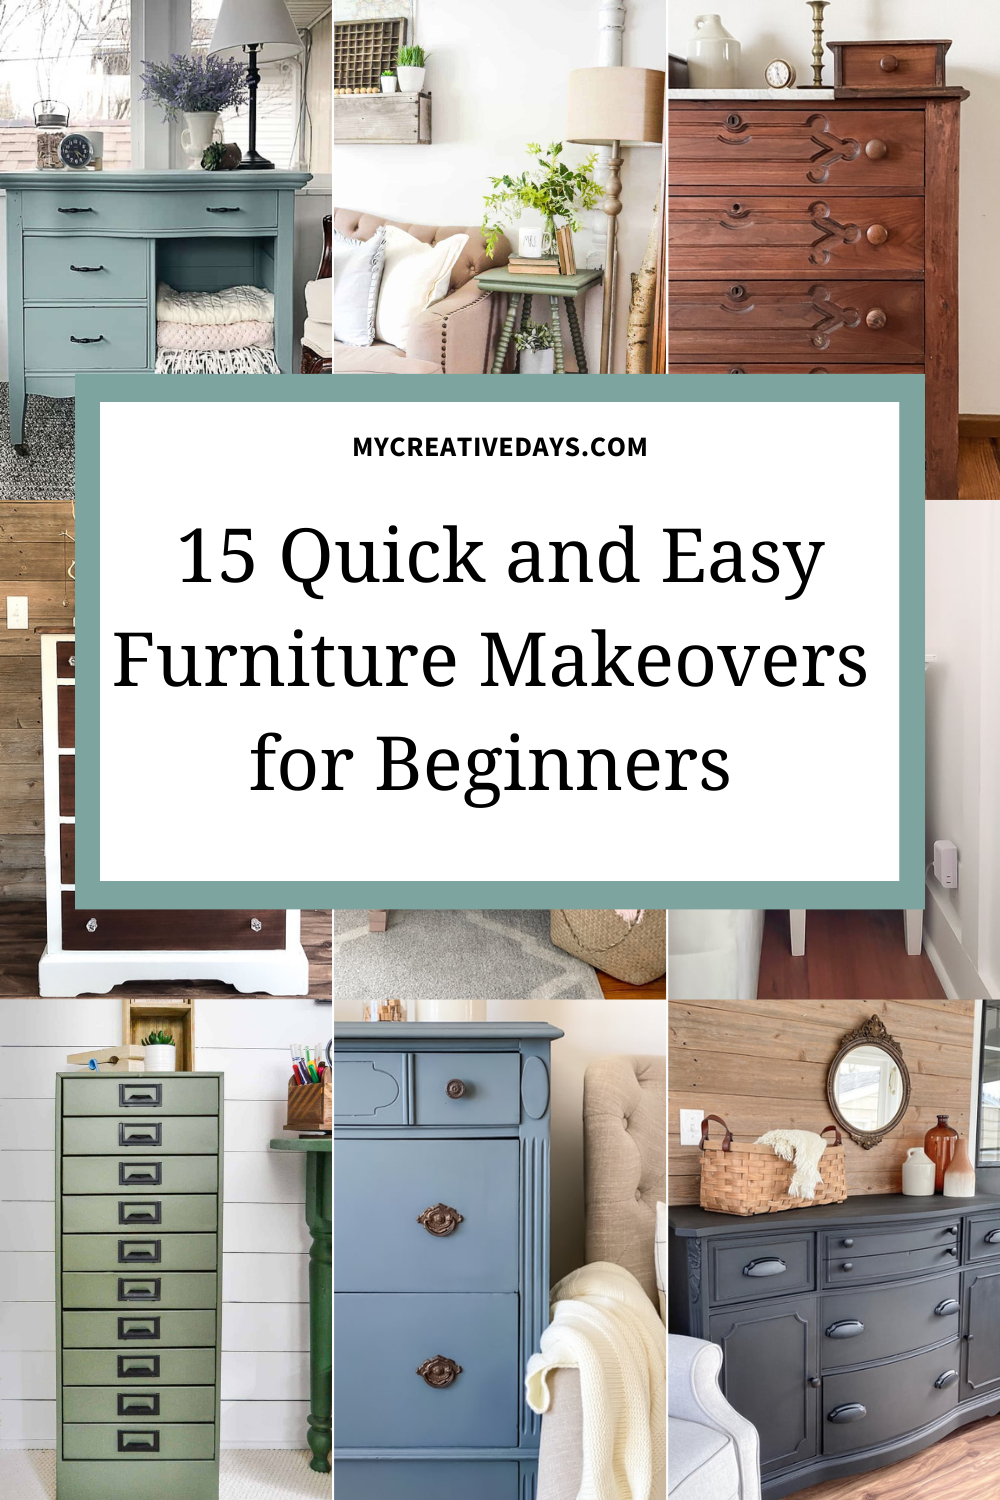 15 Quick and Easy Furniture Makeovers for Beginners